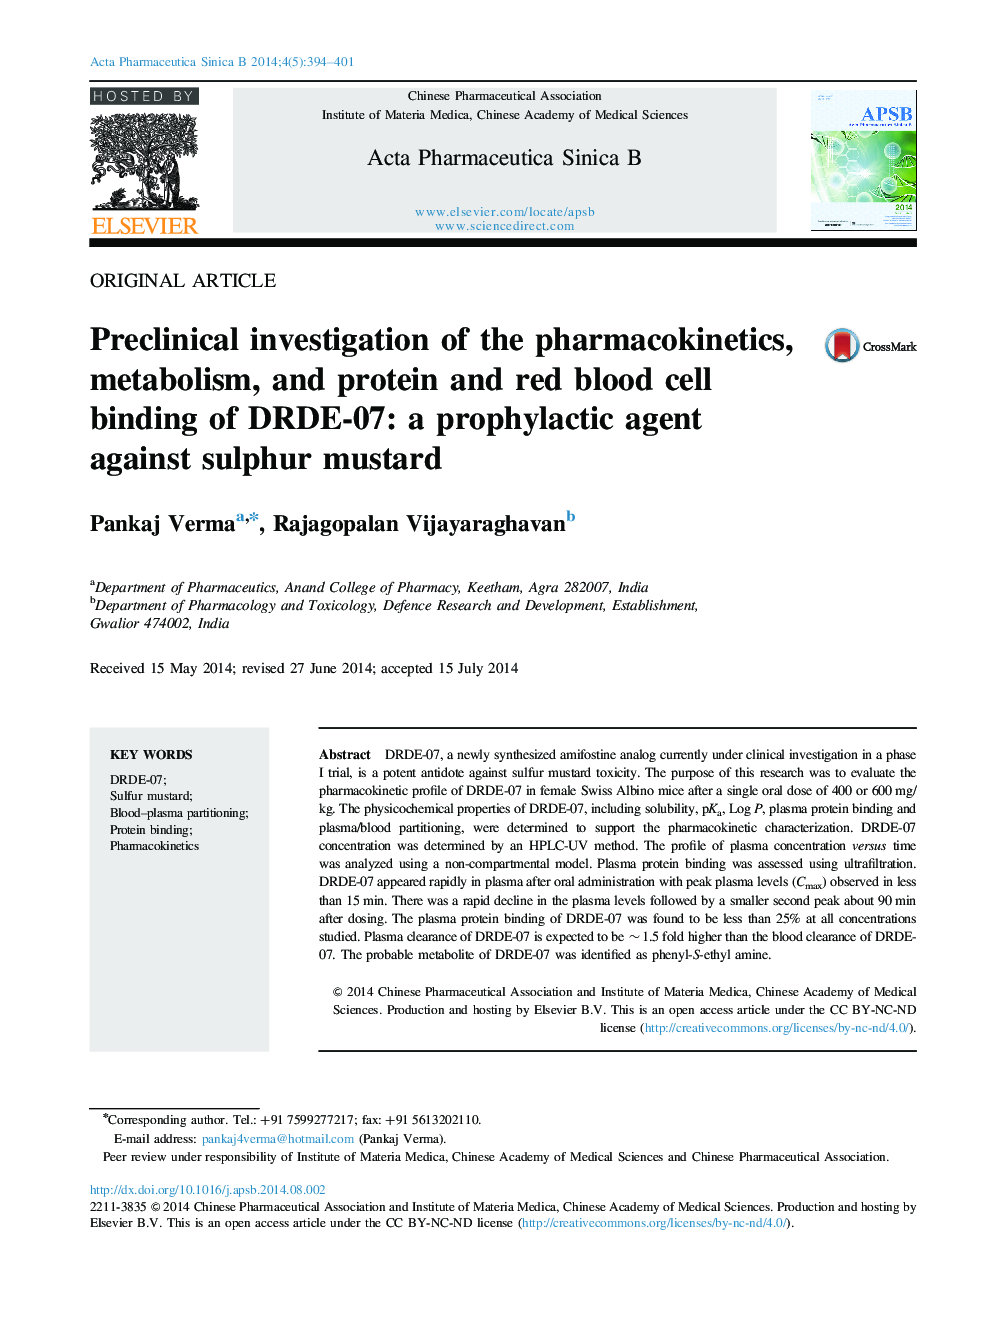 Preclinical investigation of the pharmacokinetics, metabolism, and protein and red blood cell binding of DRDE-07: a prophylactic agent against sulphur mustard 